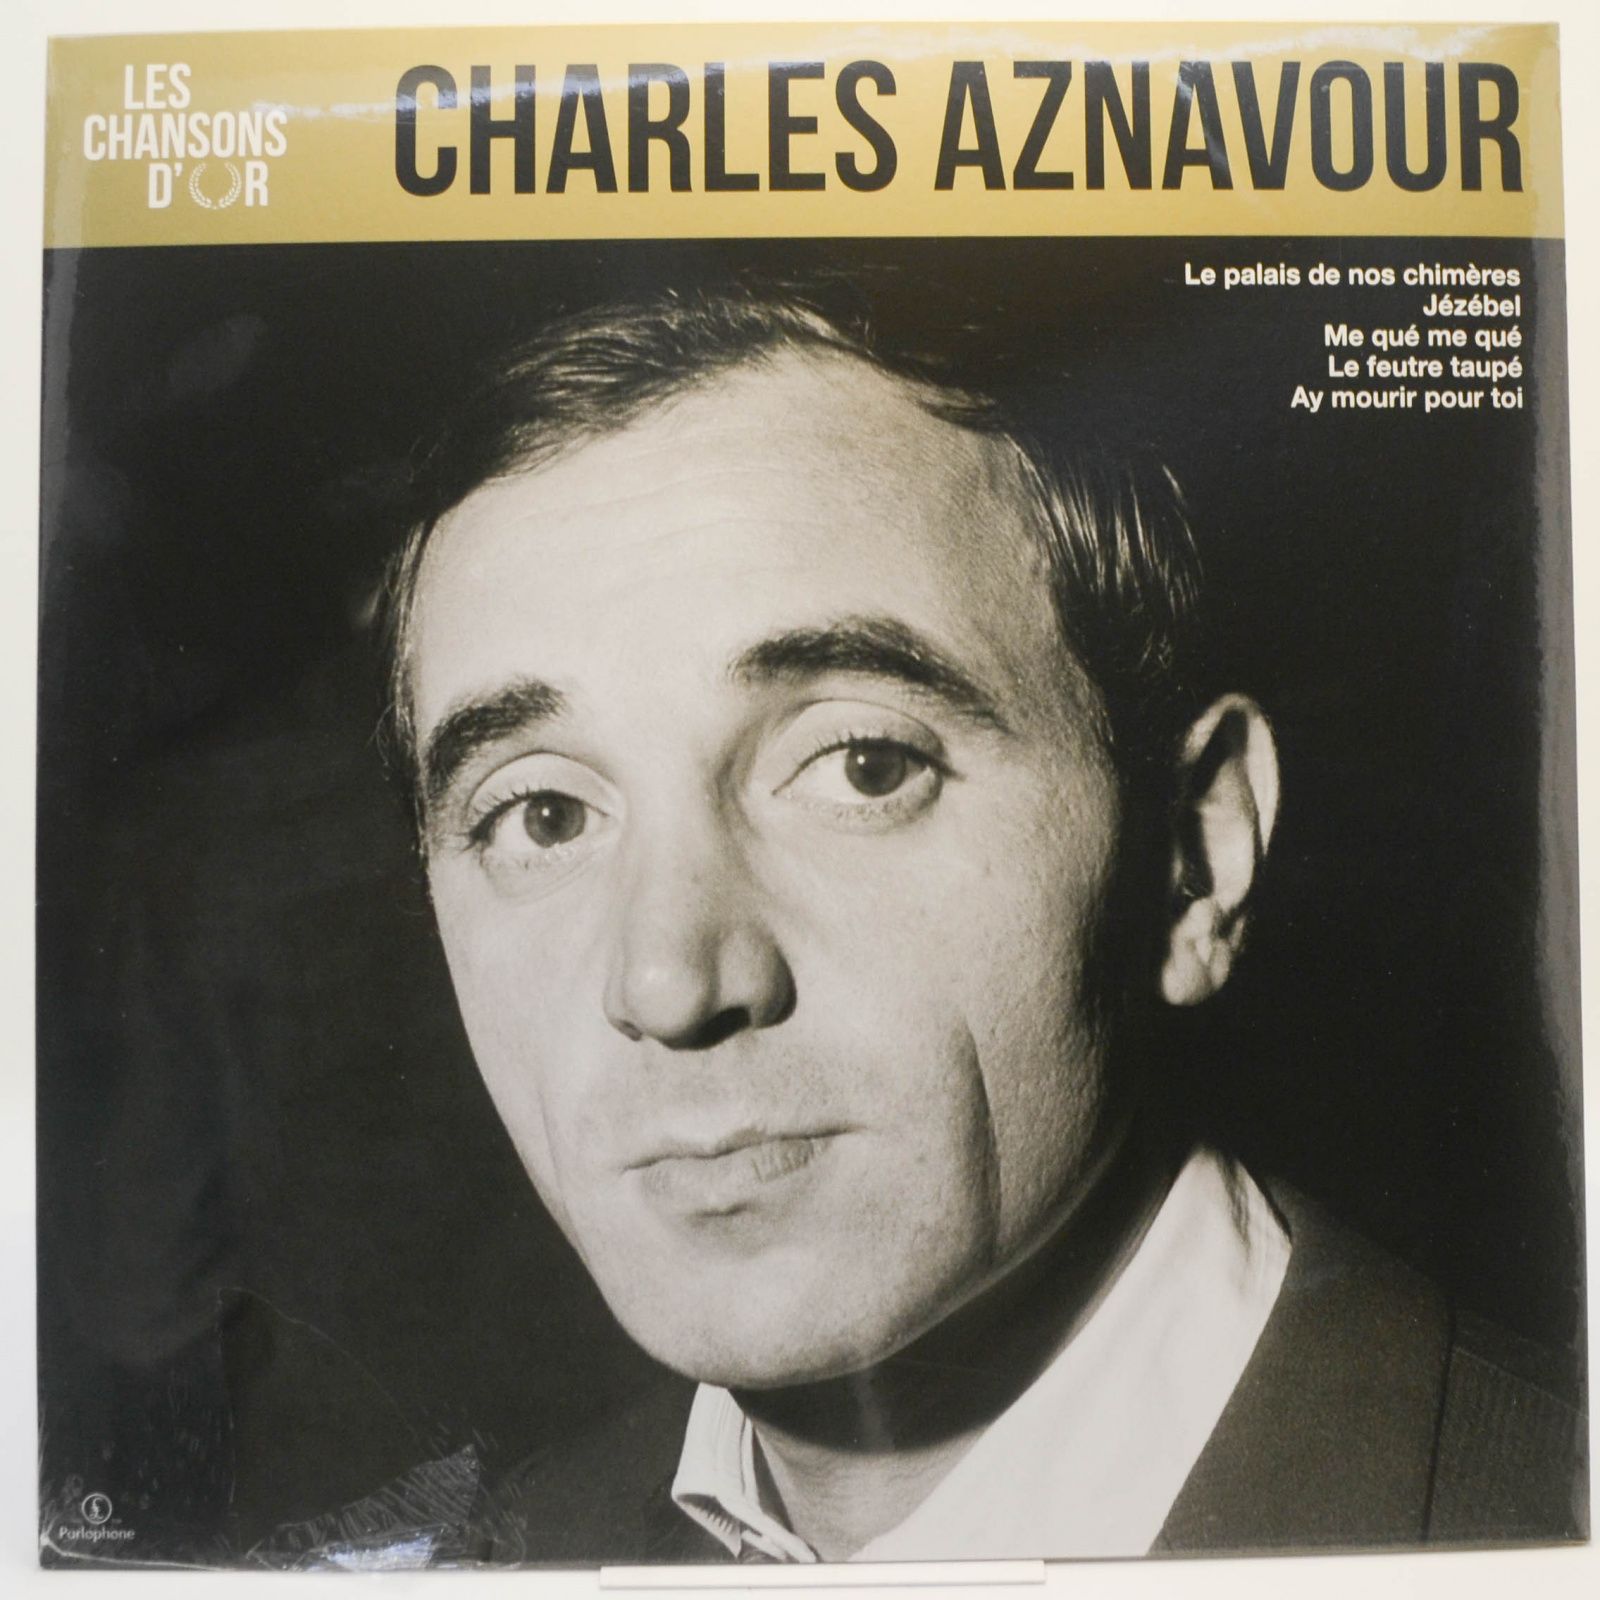 Charles Aznavour — Les Chansons D'or, 2020